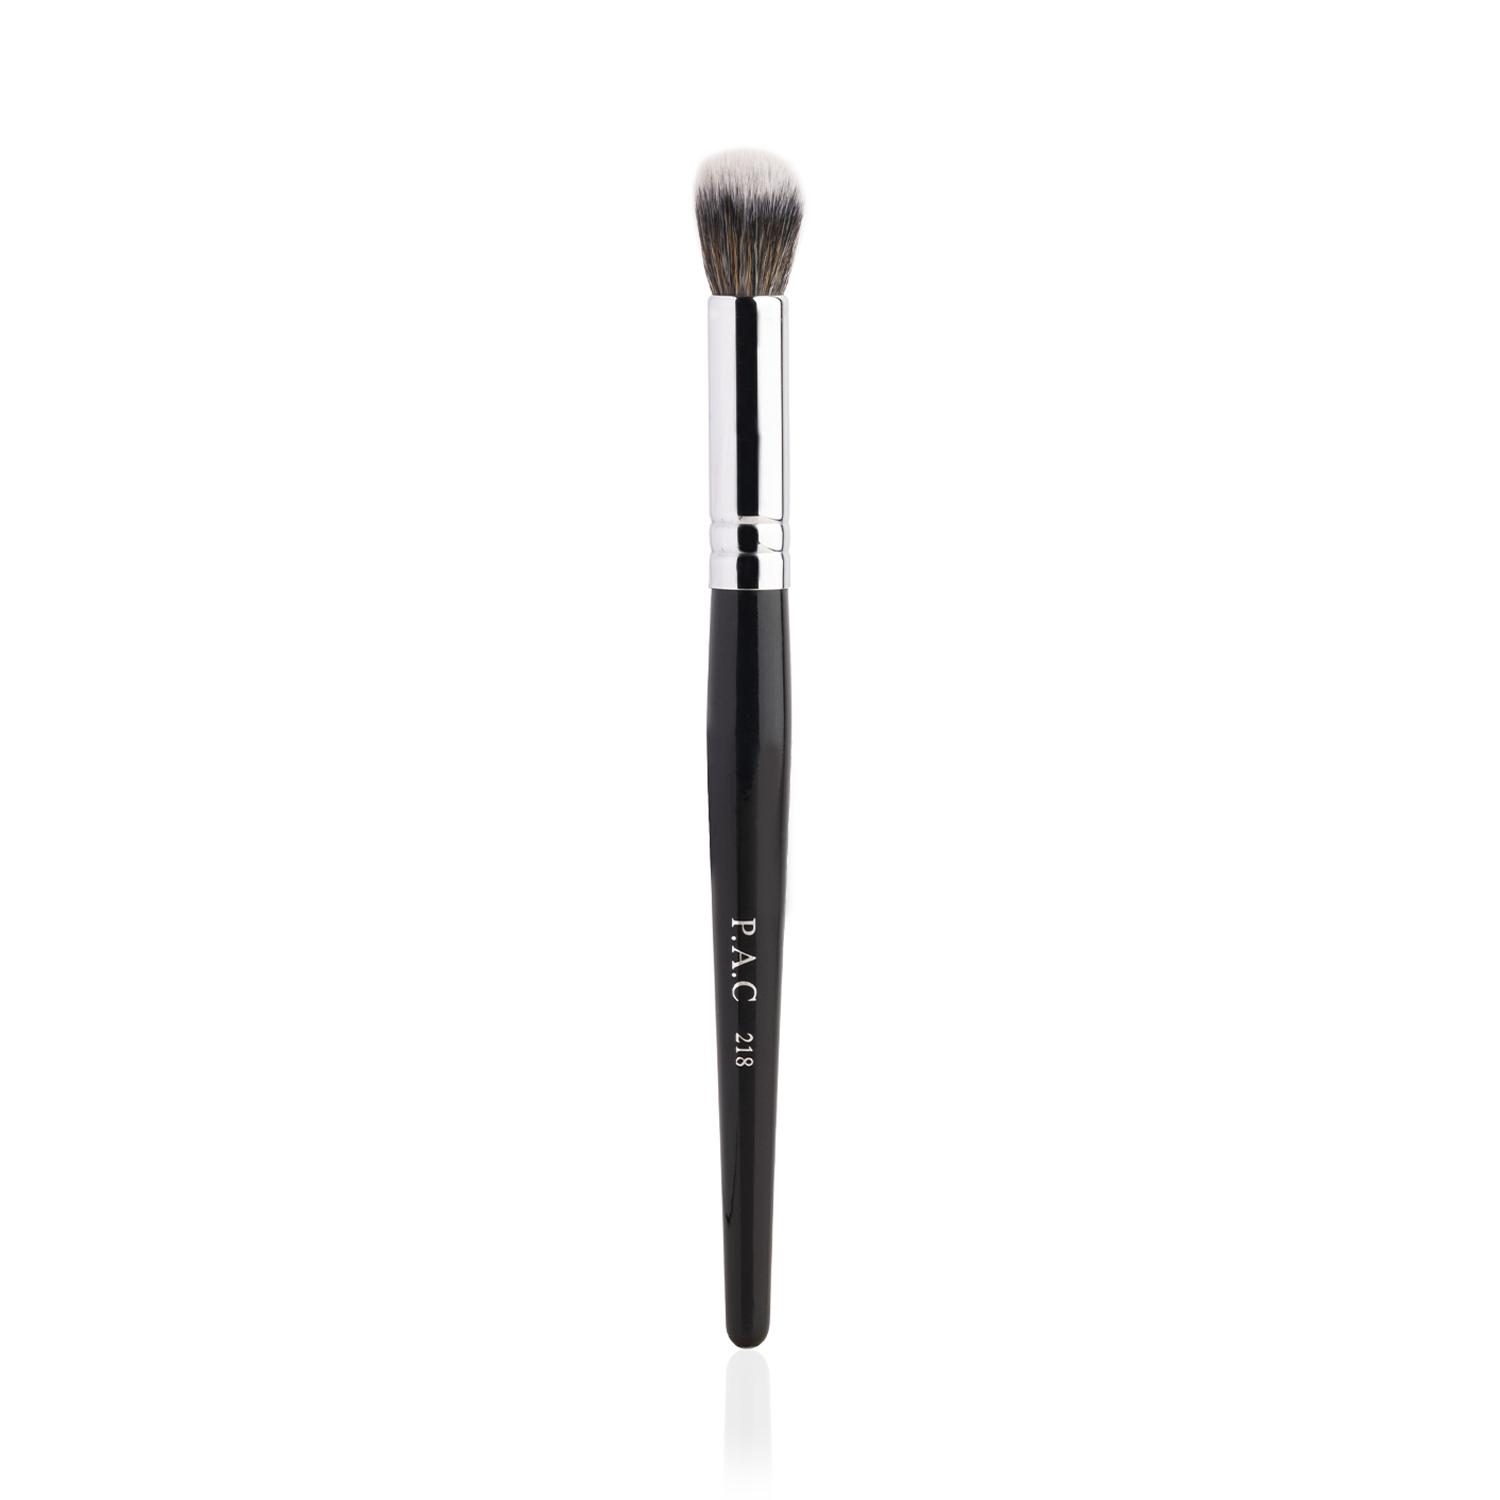 PAC | PAC Concealer Brush - 218 (1Pc)